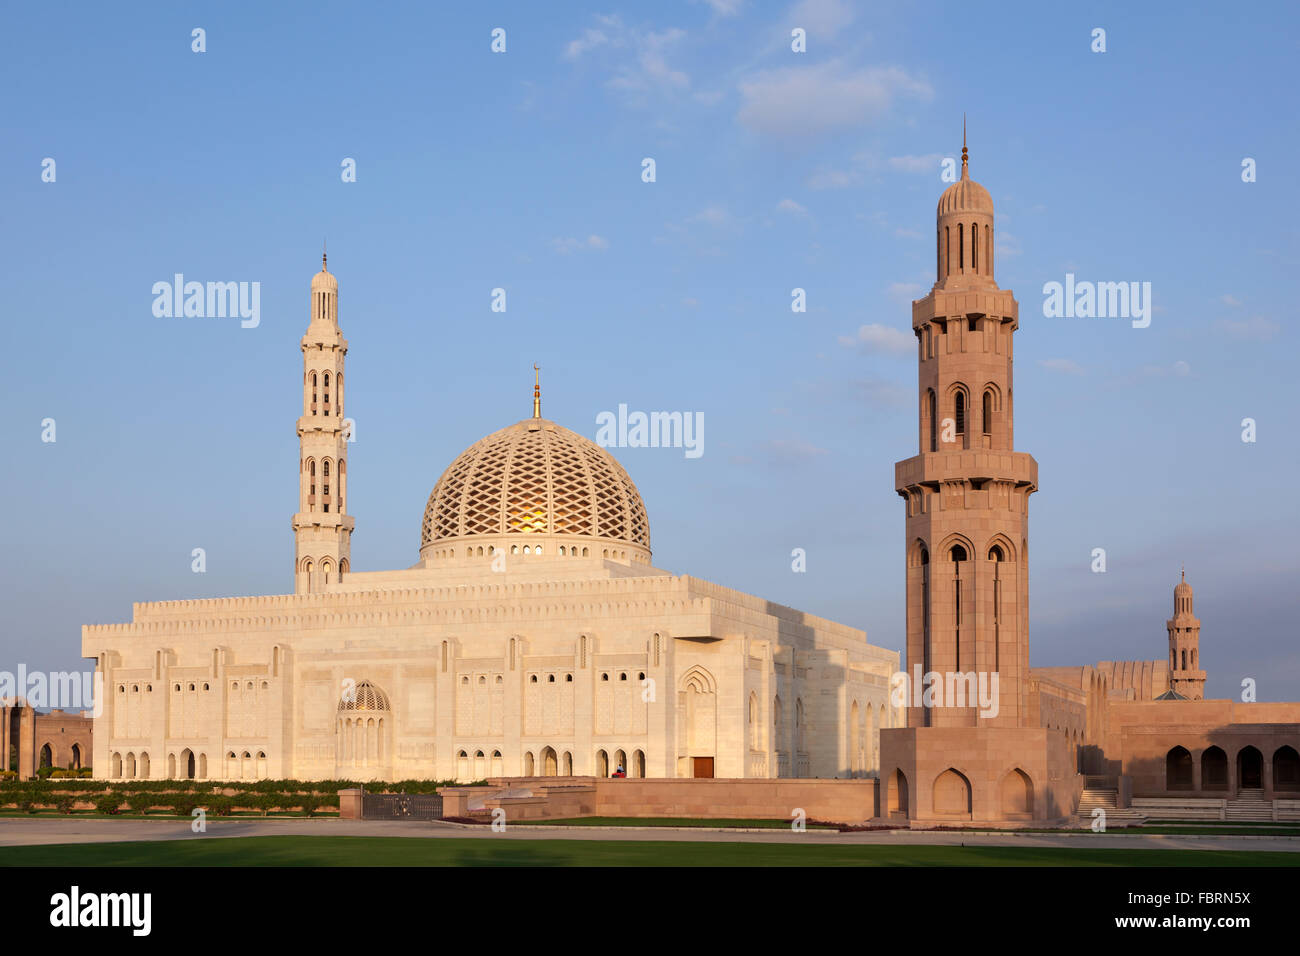 Le Sultan Qaboos Grand Mosque in Muscat, Oman Banque D'Images